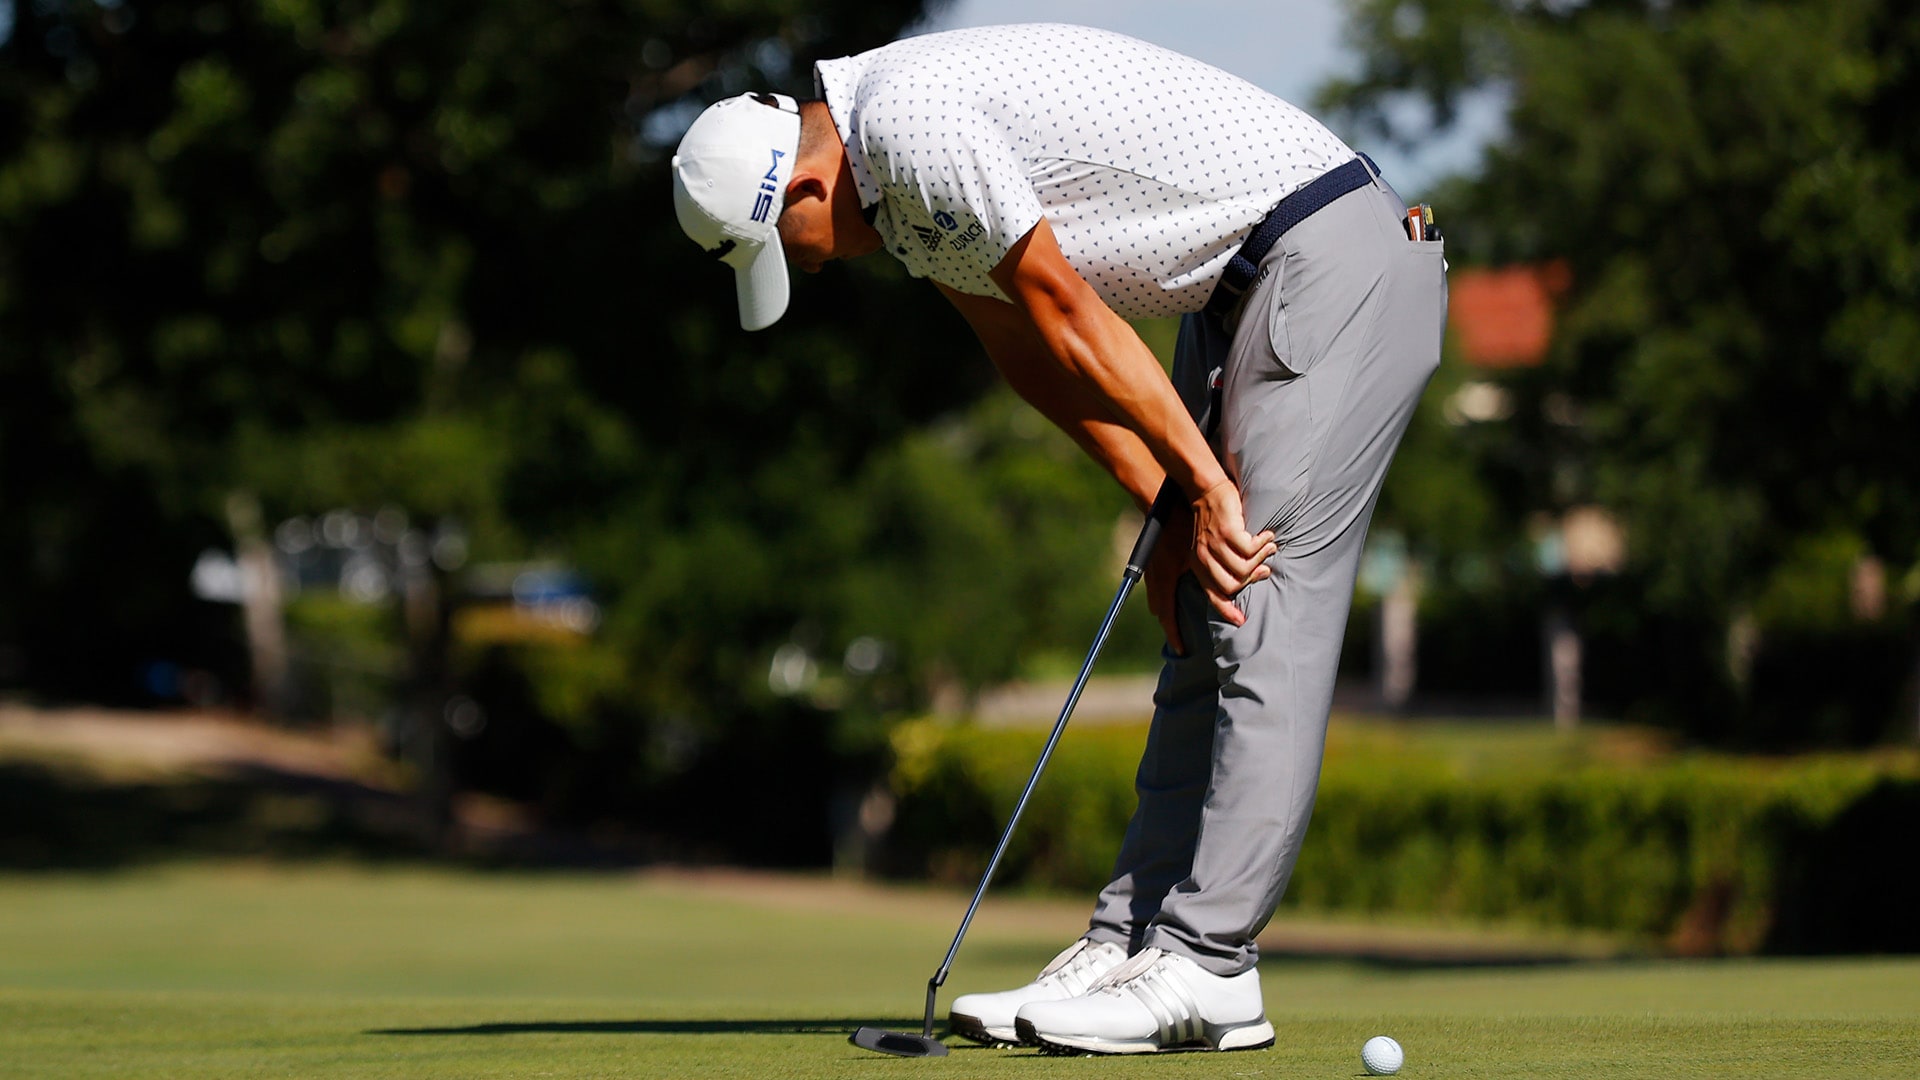 Missed putt leaves Collin Morikawa a runner-up at Colonial yet again